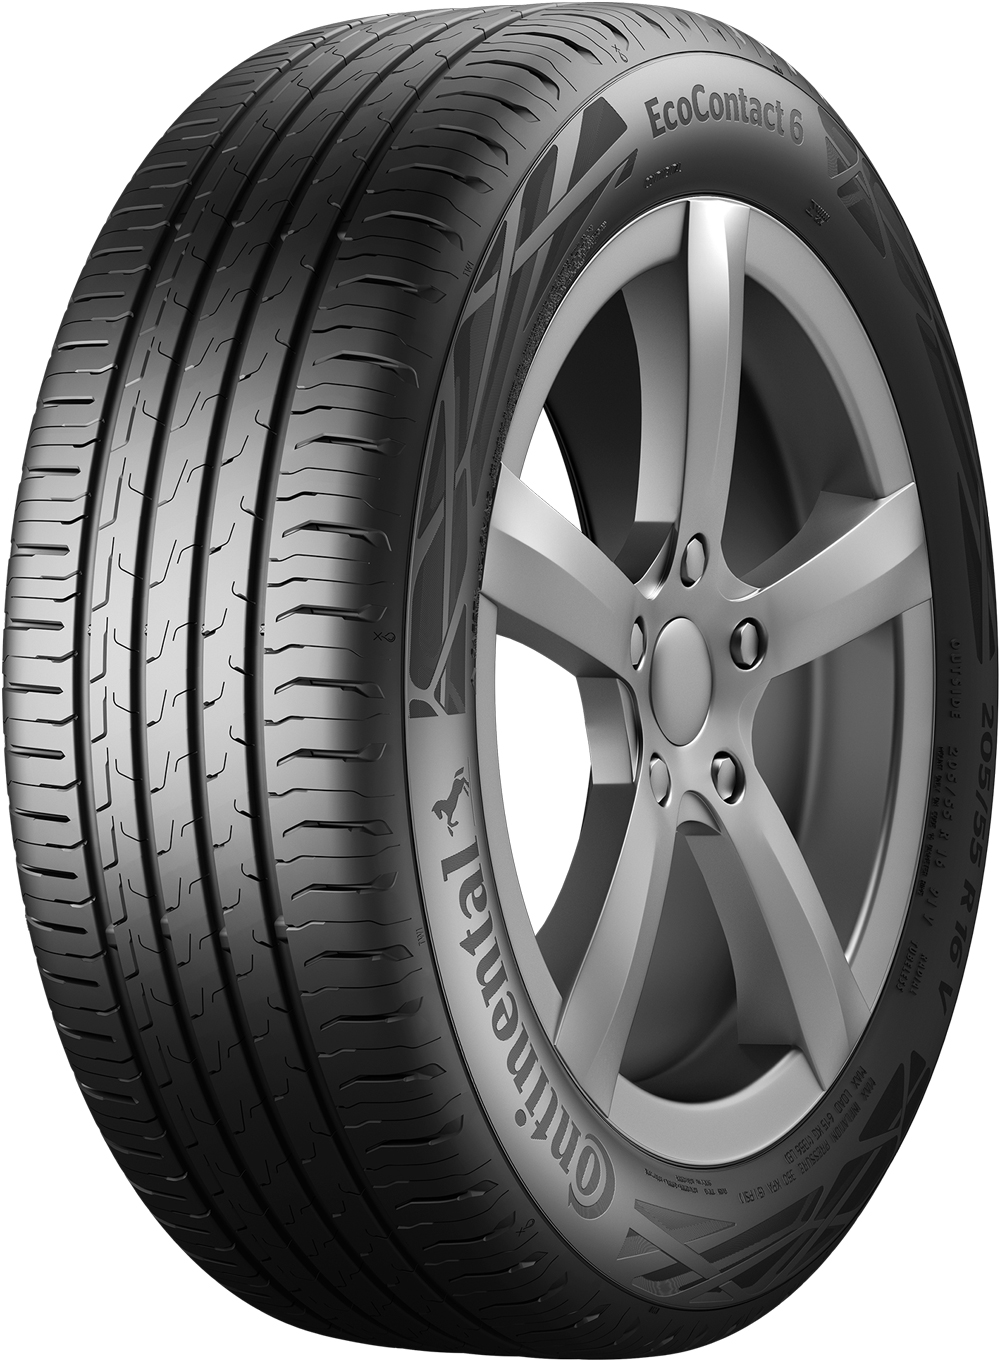 Anvelope auto CONTINENTAL EcoContact 6 AO1 XL 225/55 R18 102Y